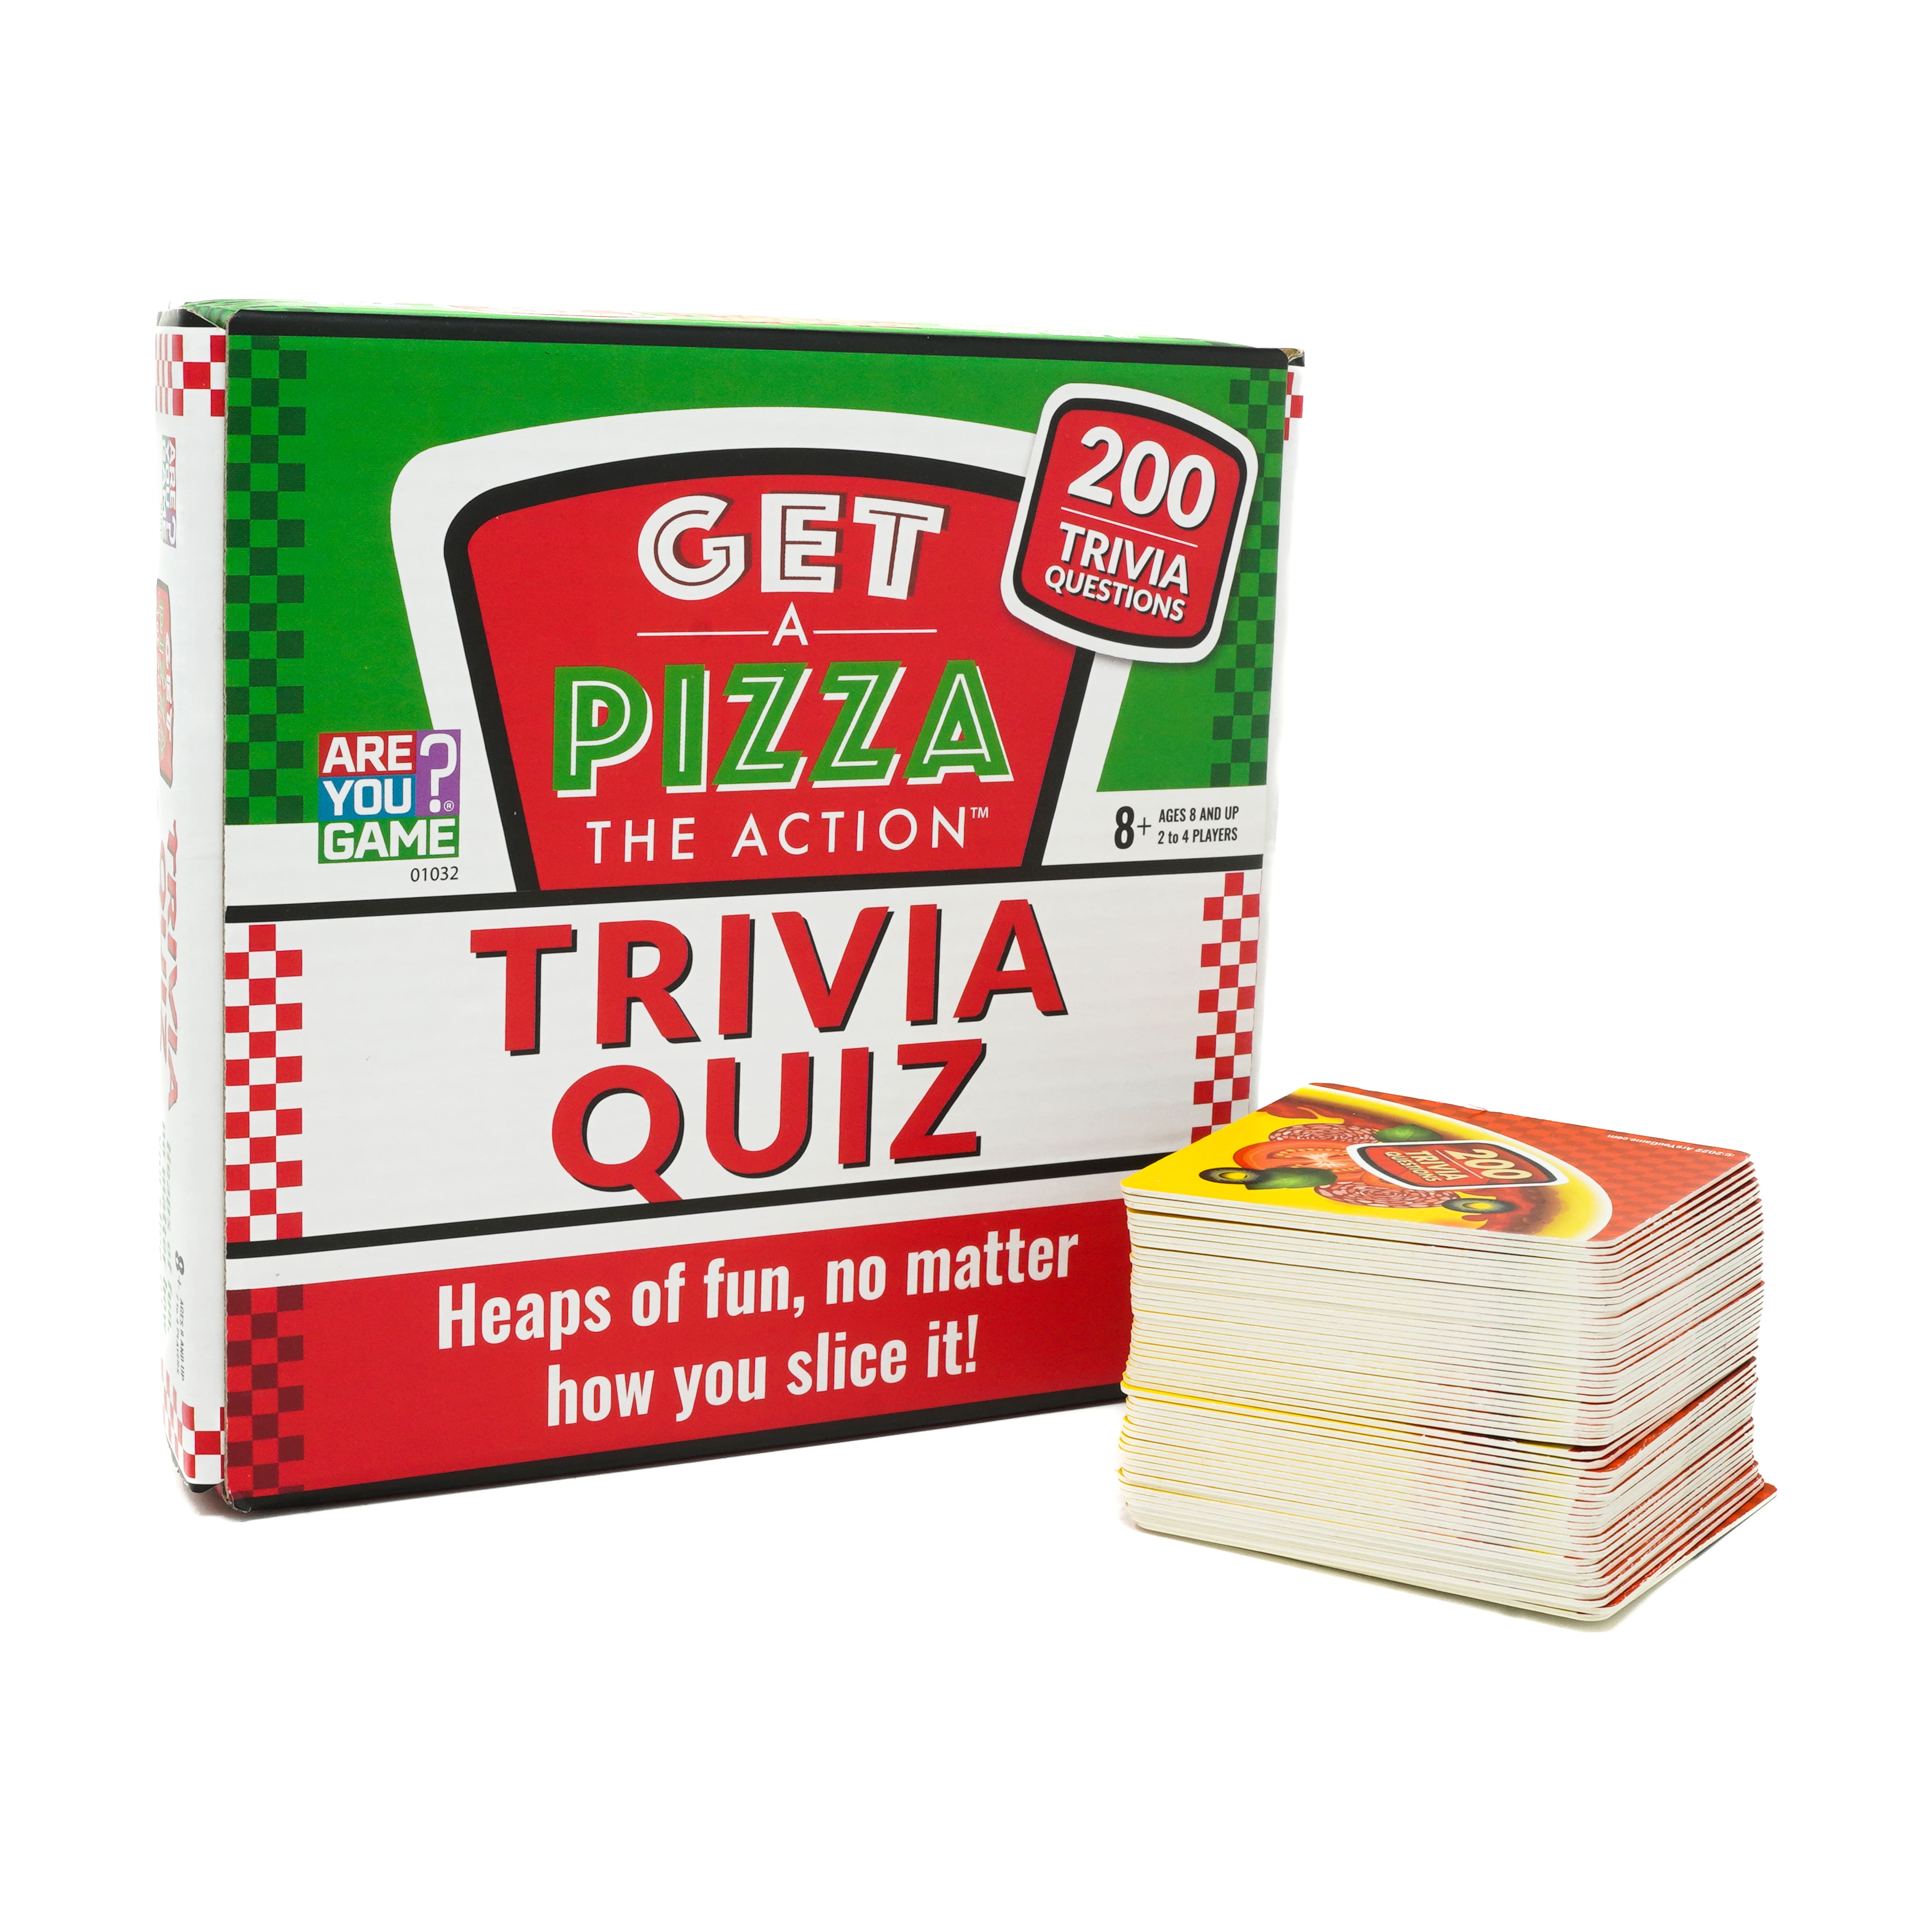 Get a Pizza the Action Trivia Quiz